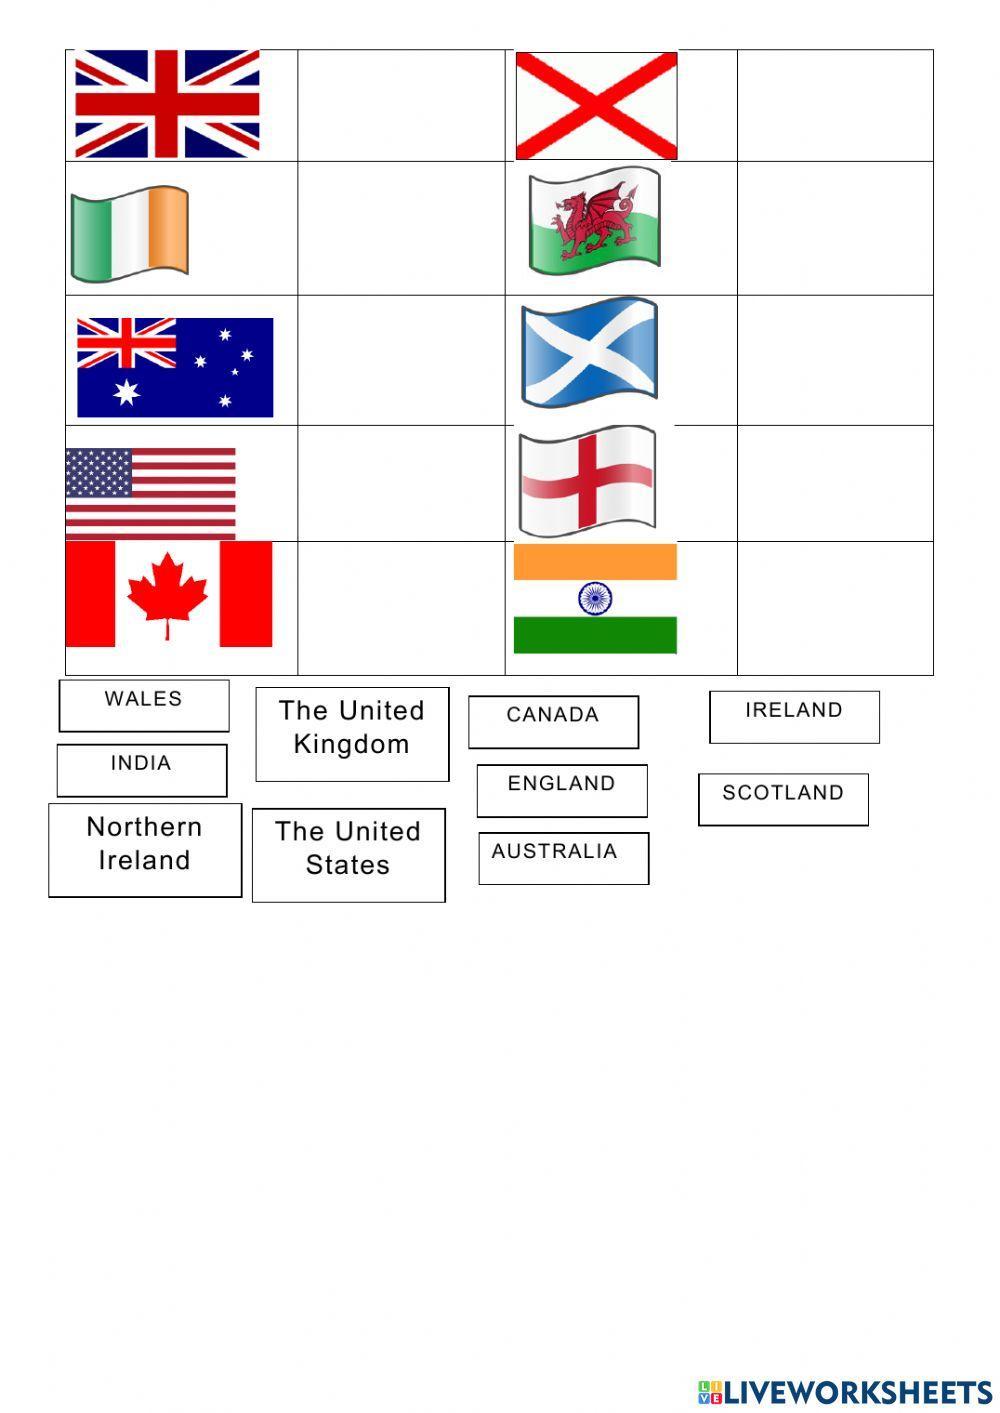 English speaking countries and flags worksheet | Live Worksheets